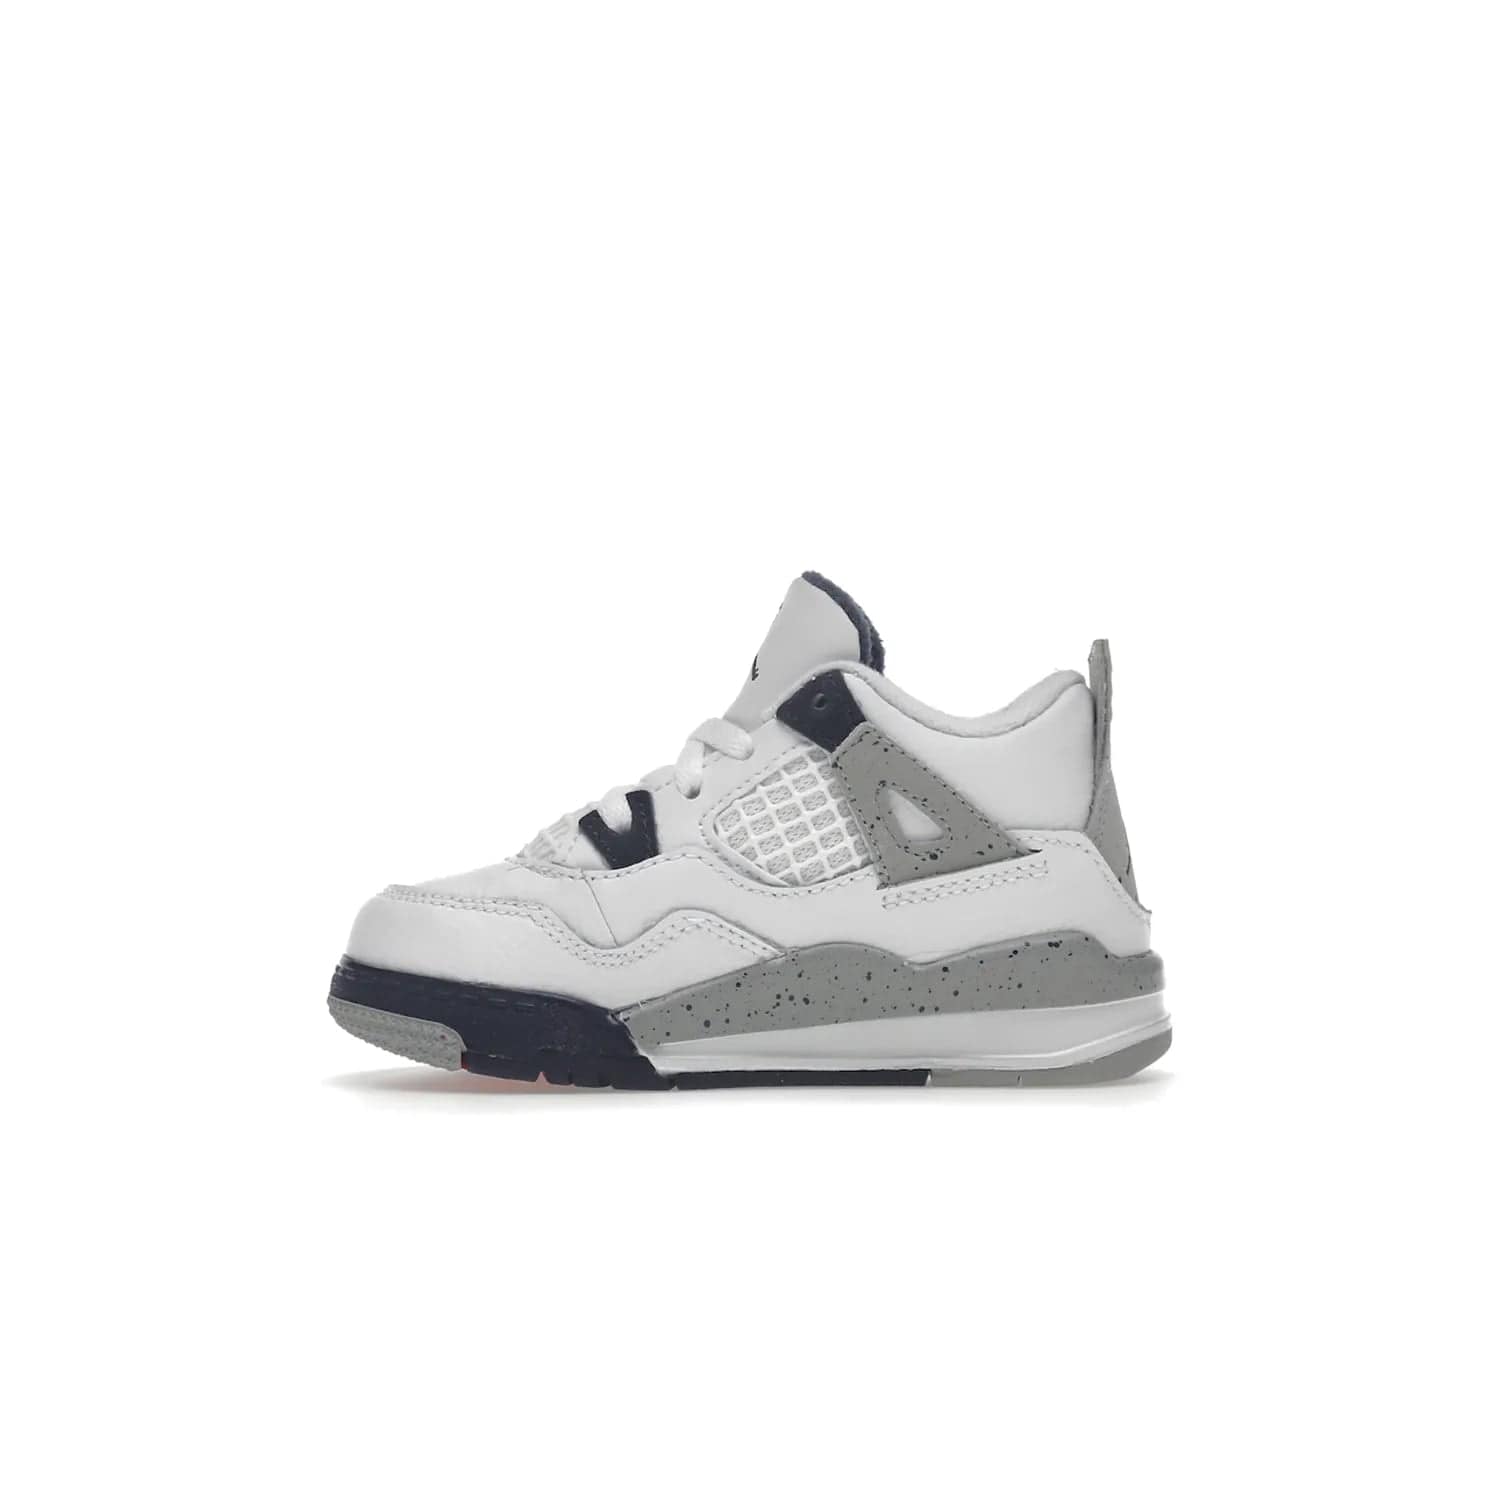 Jordan 4 Retro Midnight Navy (TD) - Image 19 - Only at www.BallersClubKickz.com - Introducing the Jordan 4 Retro Midnight Navy (TD) for kids. White leather upper with navy and grey accents plus fire red detailing. Perfect for everyday wear. Get yours before they sell out.